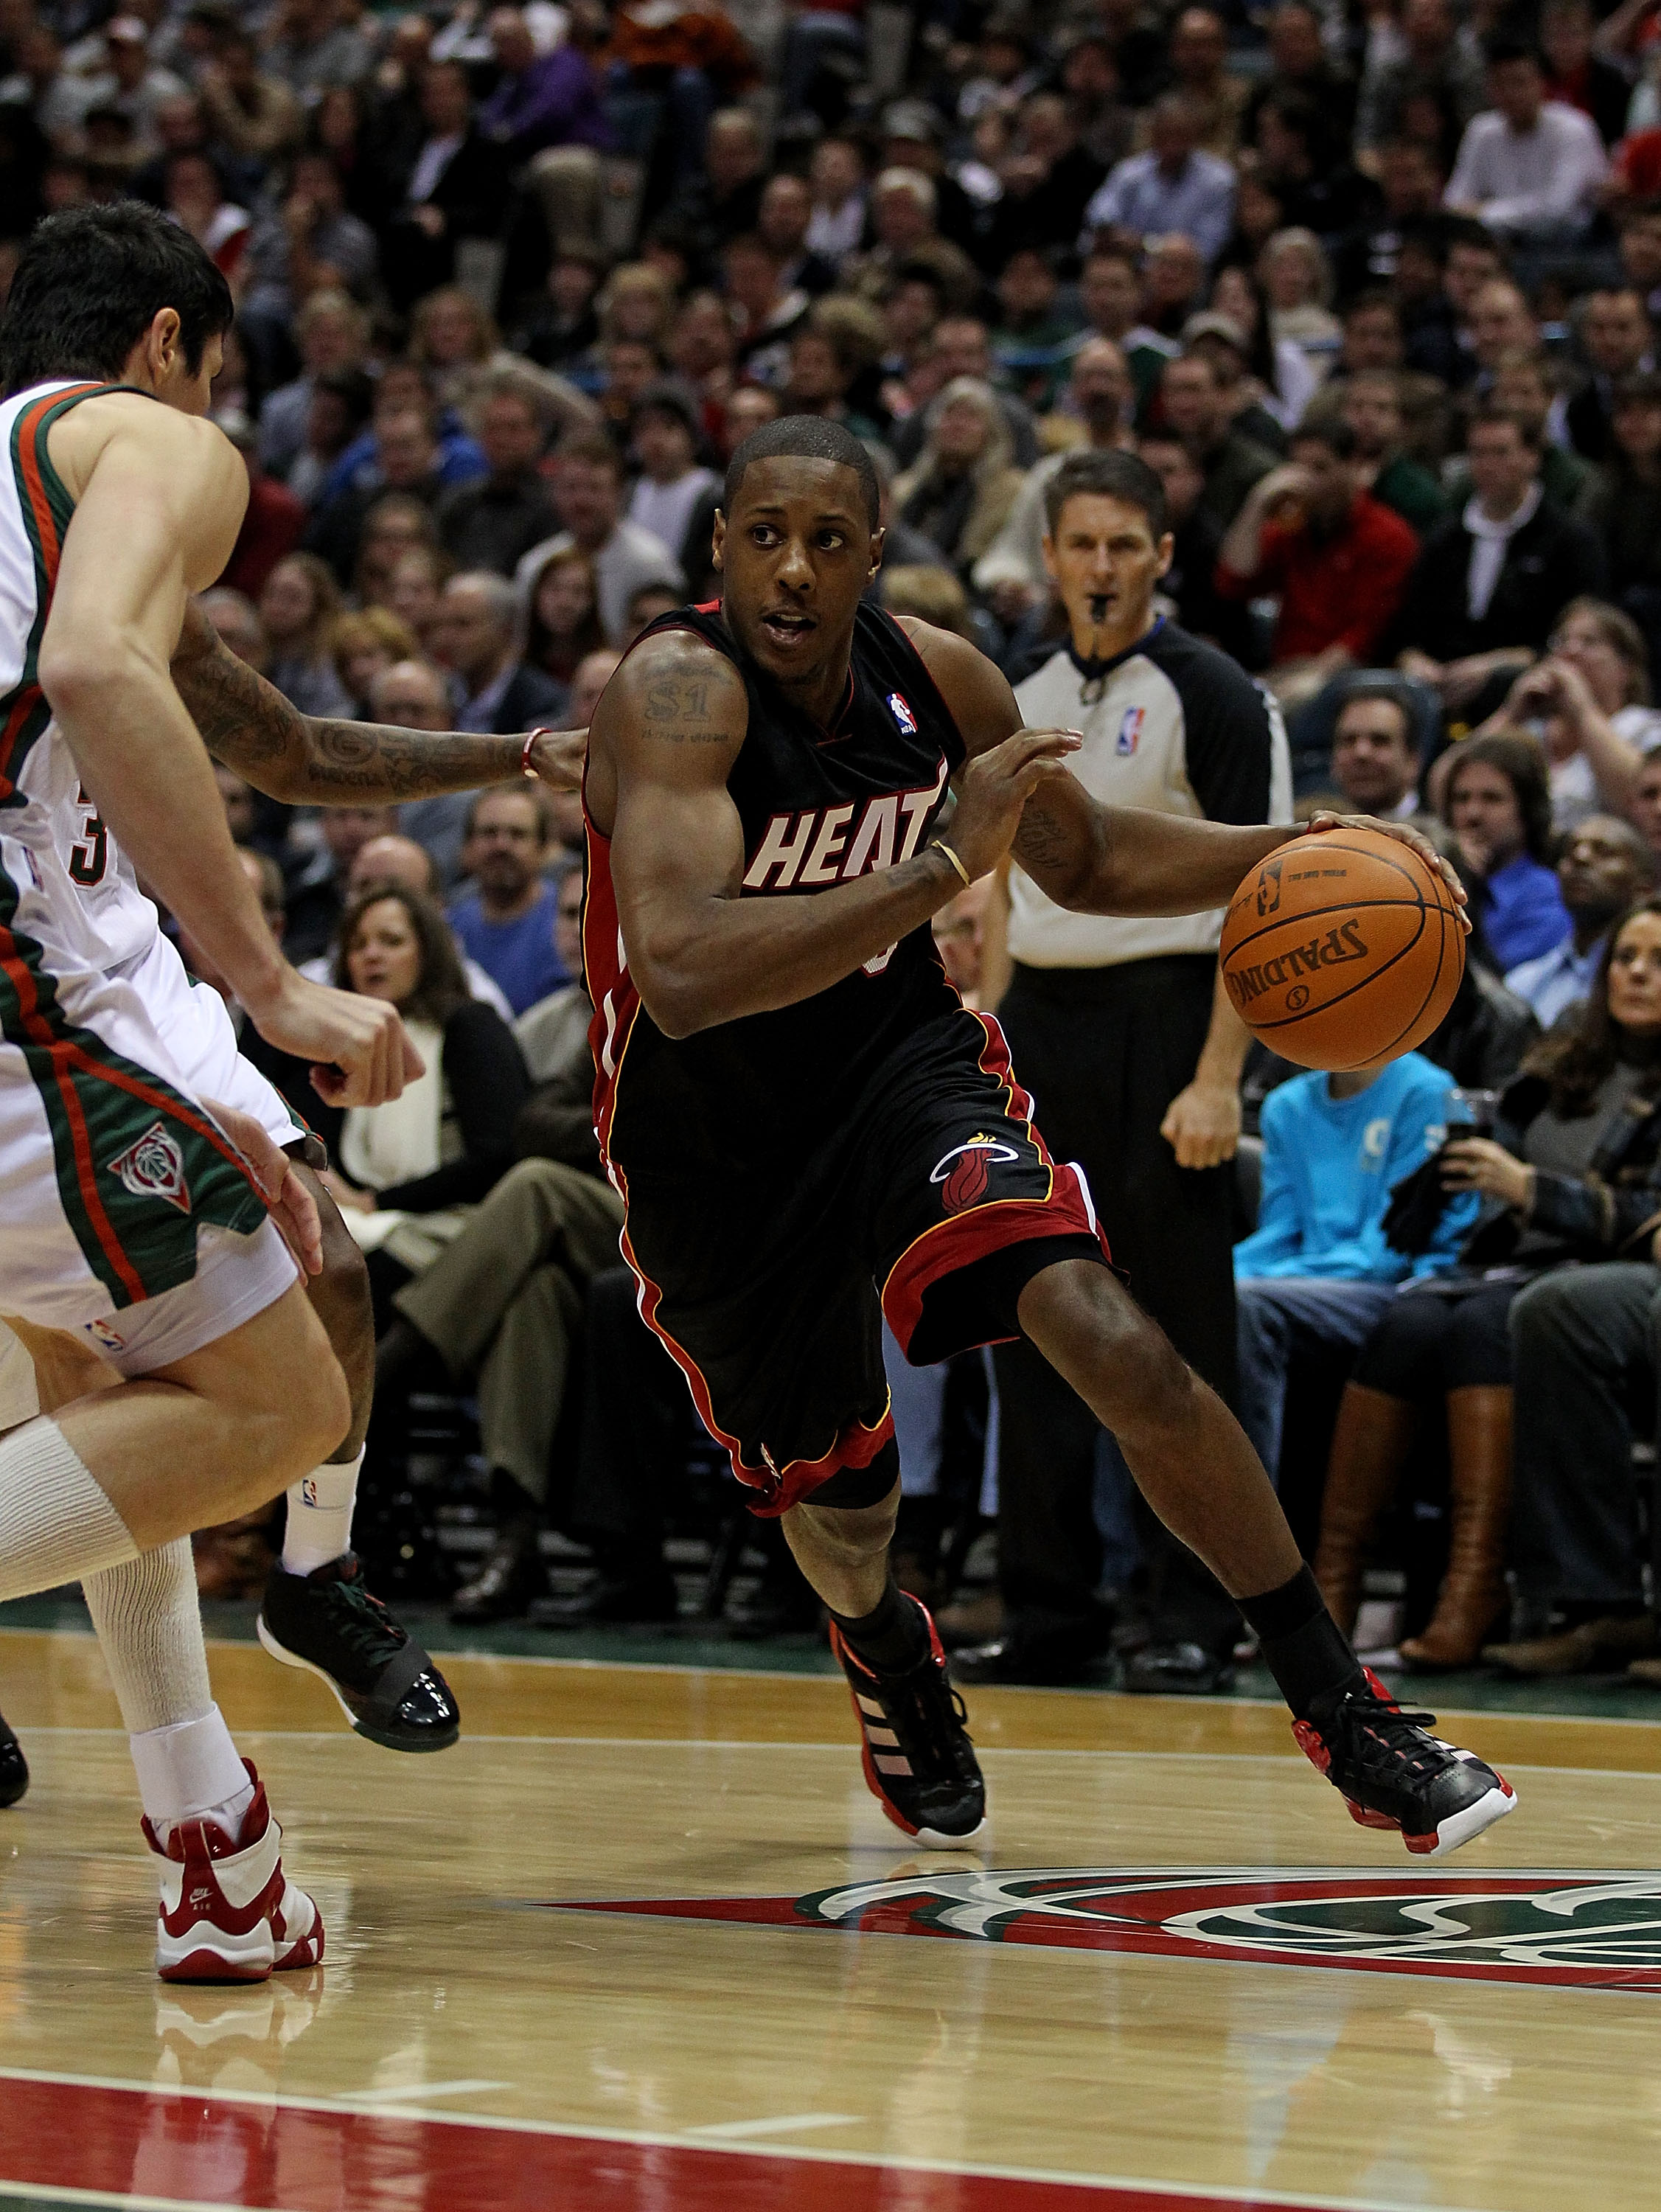 Miami Heat sharpshooter Mario Chalmers is often inconsistent, but